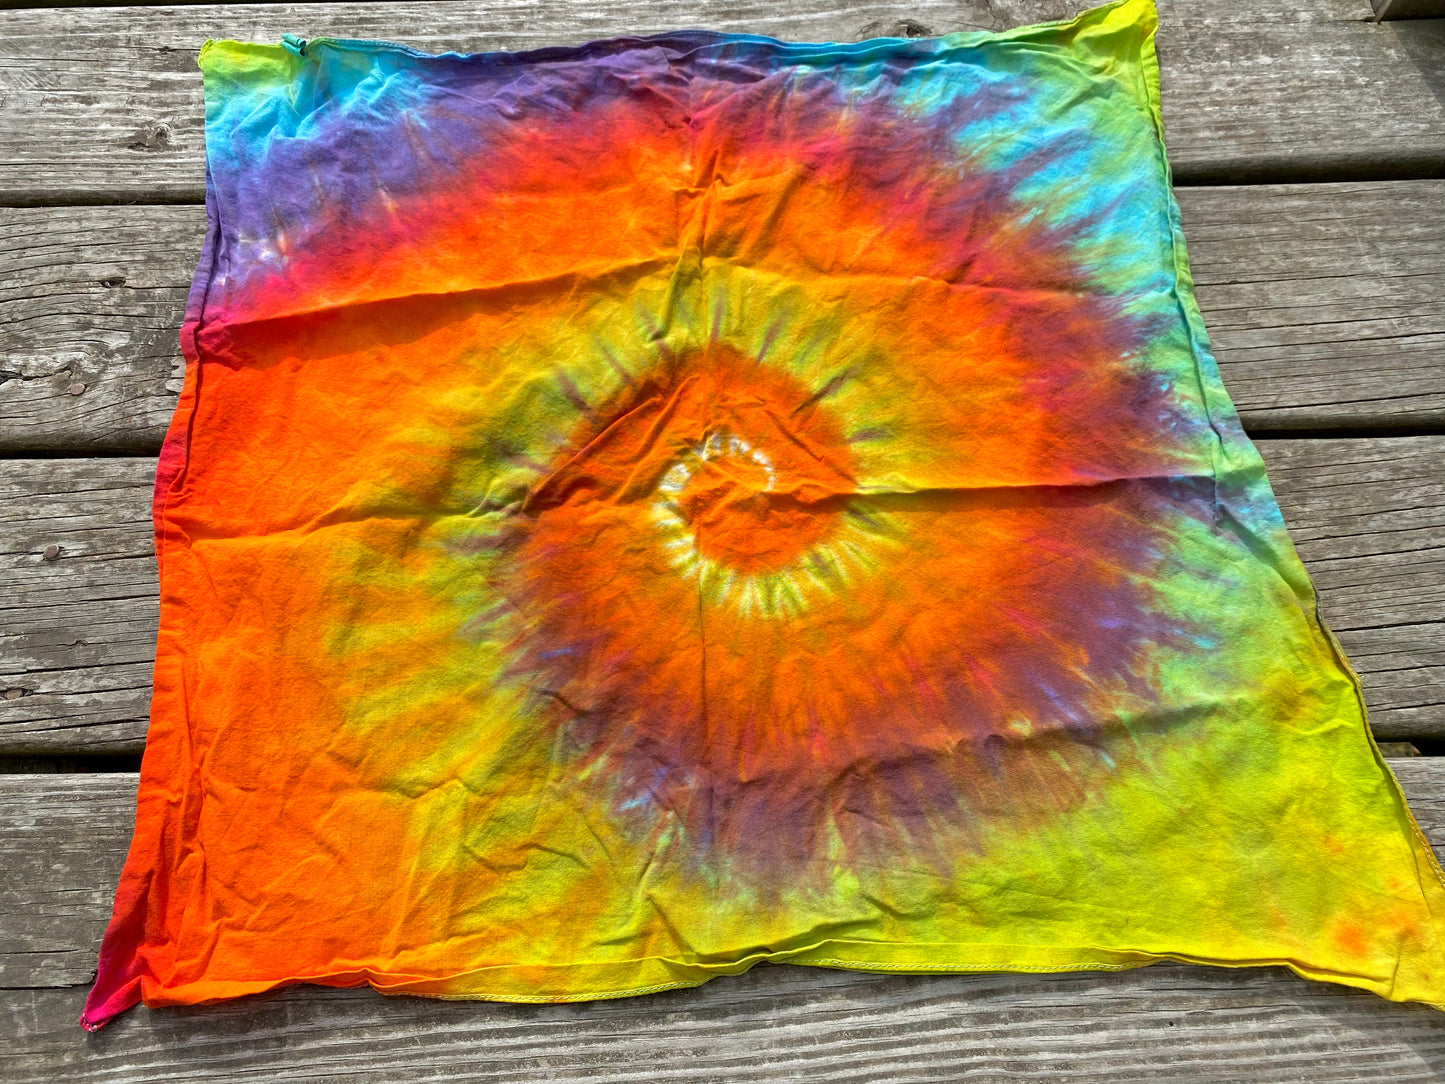 Square Bandanas - You choose color! Rainbow, galaxy, and so many more!